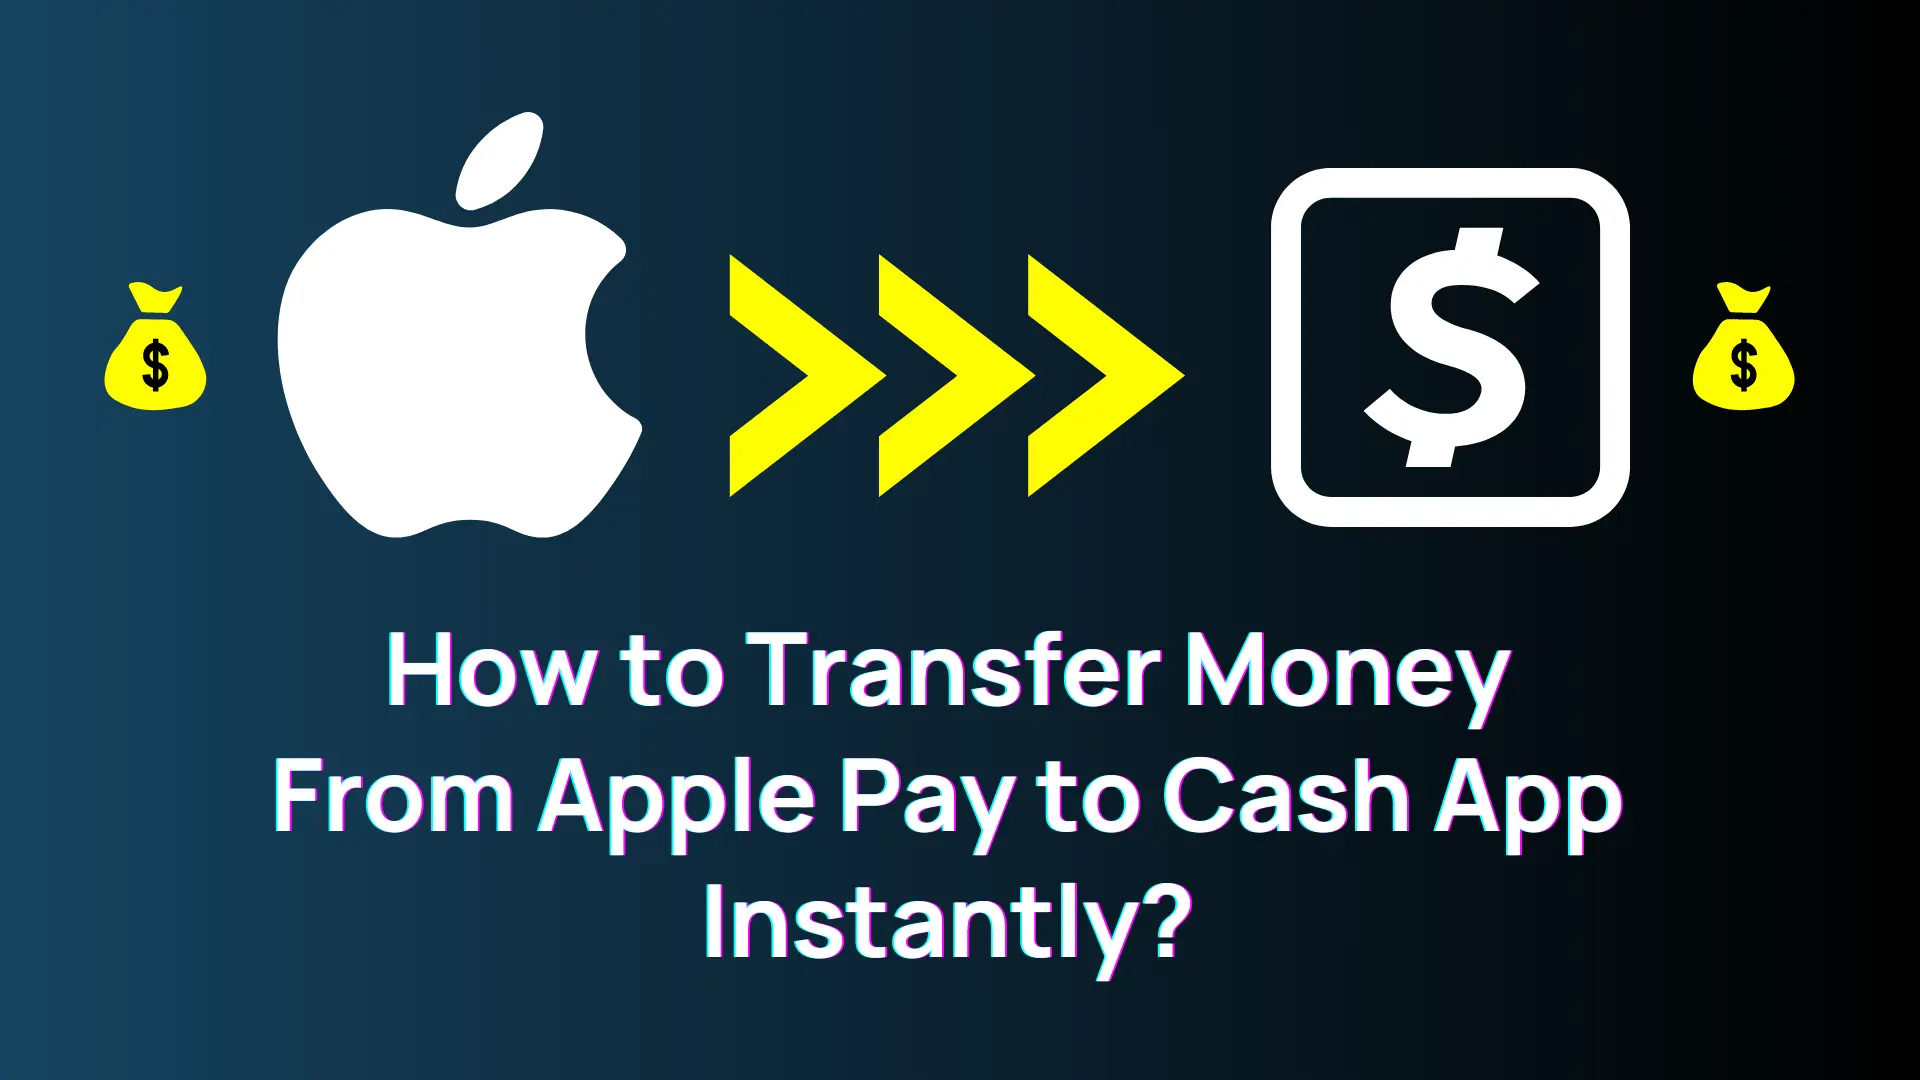 How to Transfer Money From Apple Pay to Cash App Instantly